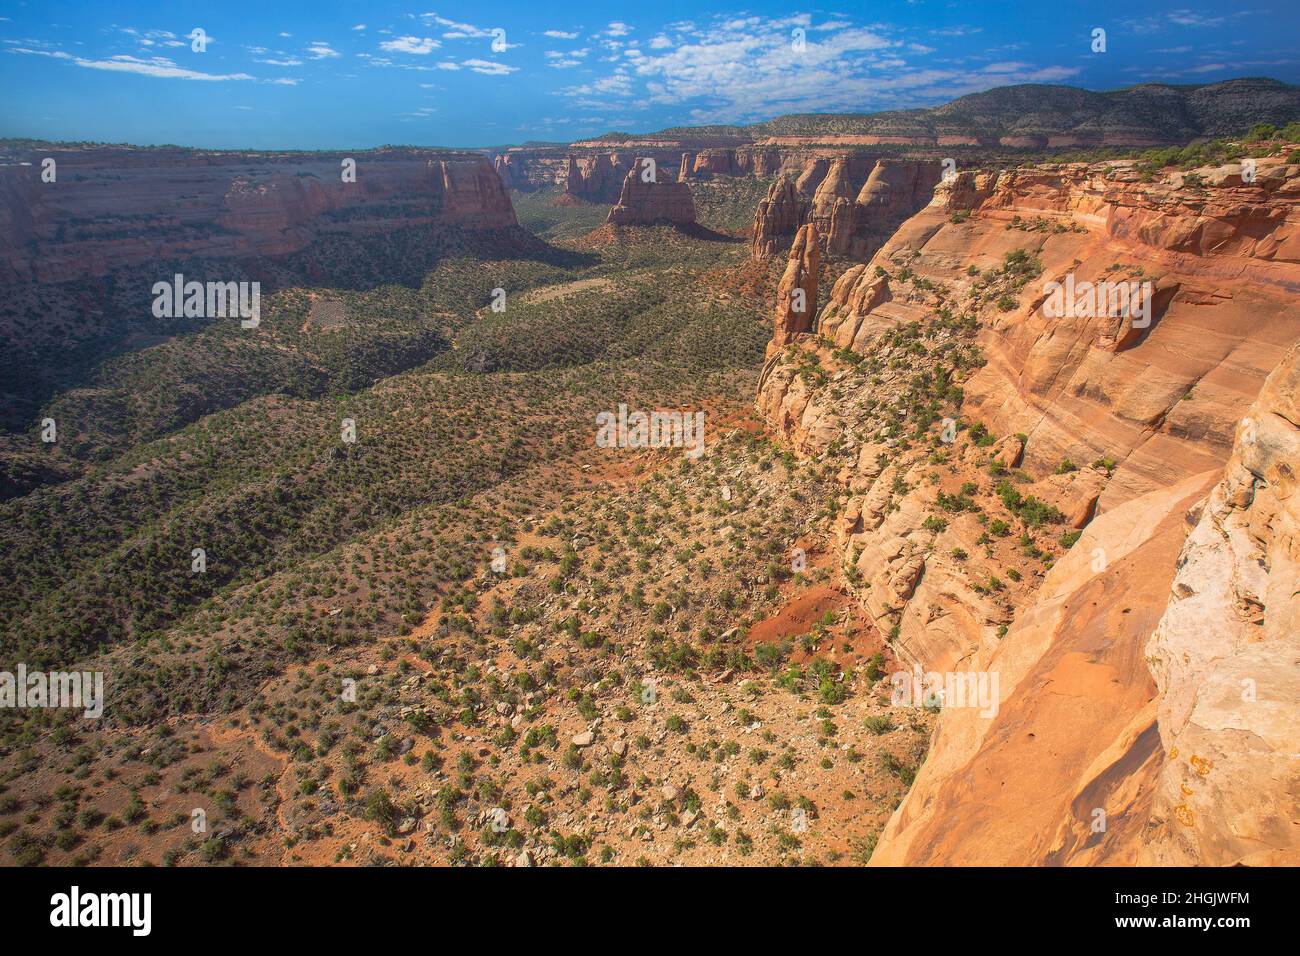 Beautiful scenic canyon landscape at Colorado National Monument Stock Photo